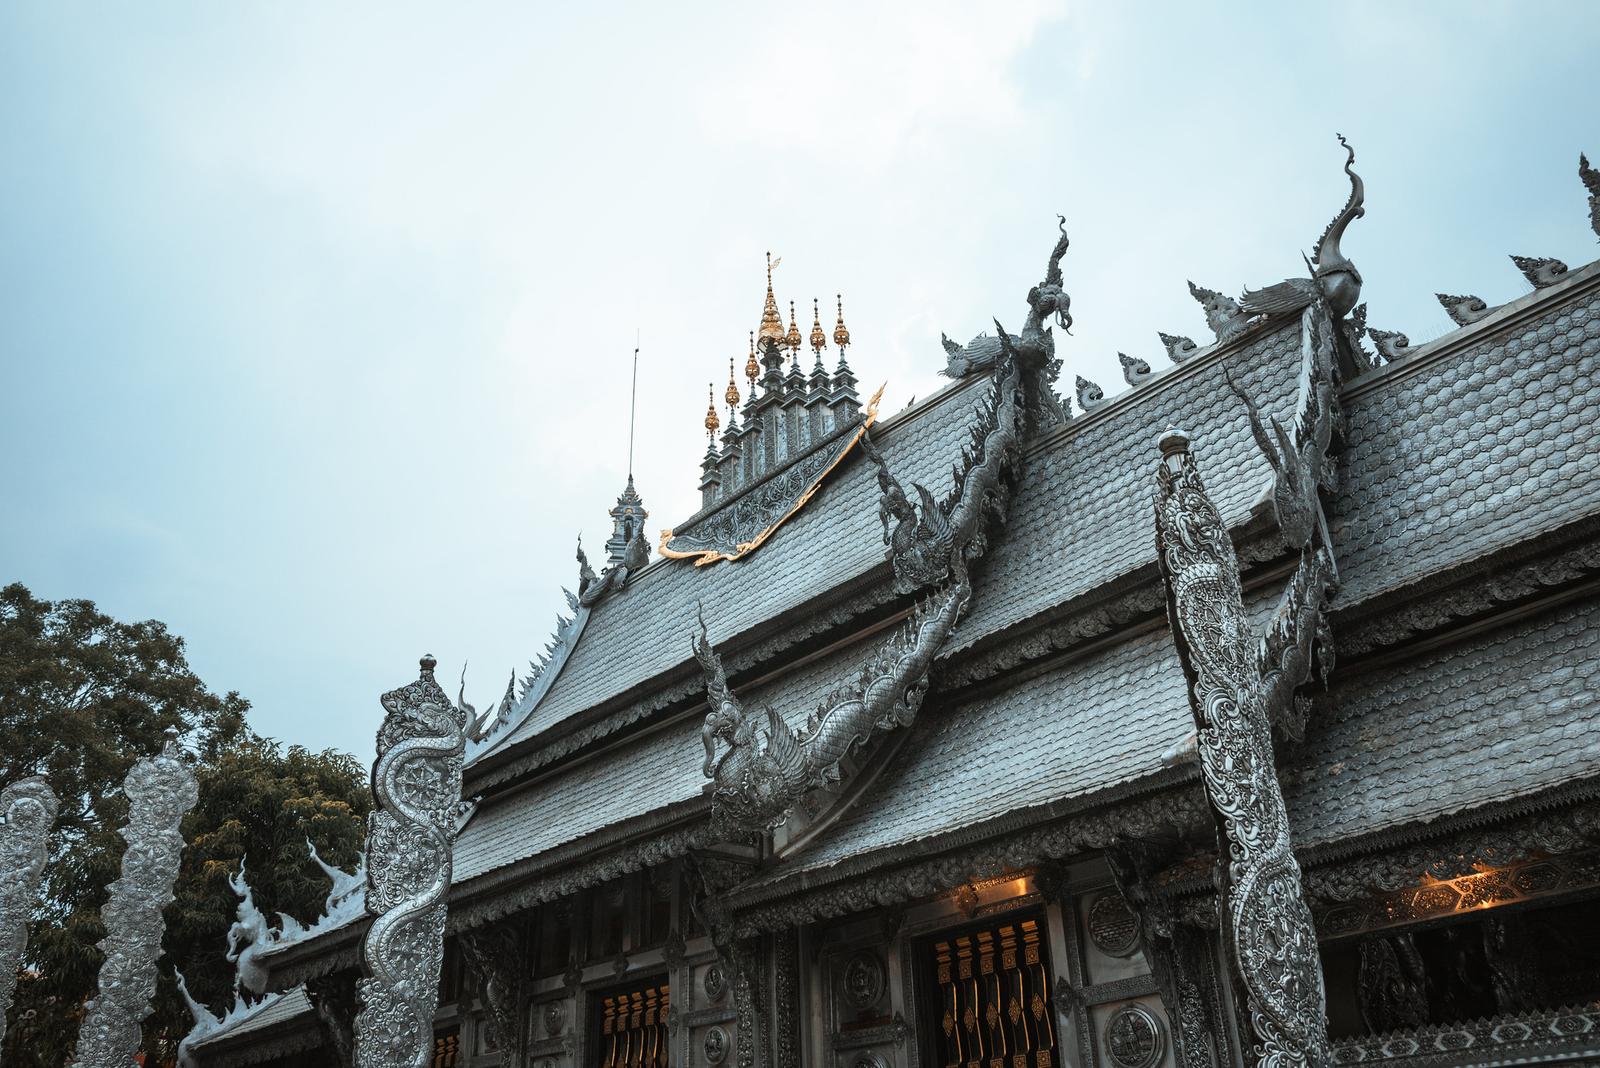 The Silver-Gilded Wat Sri Suphan